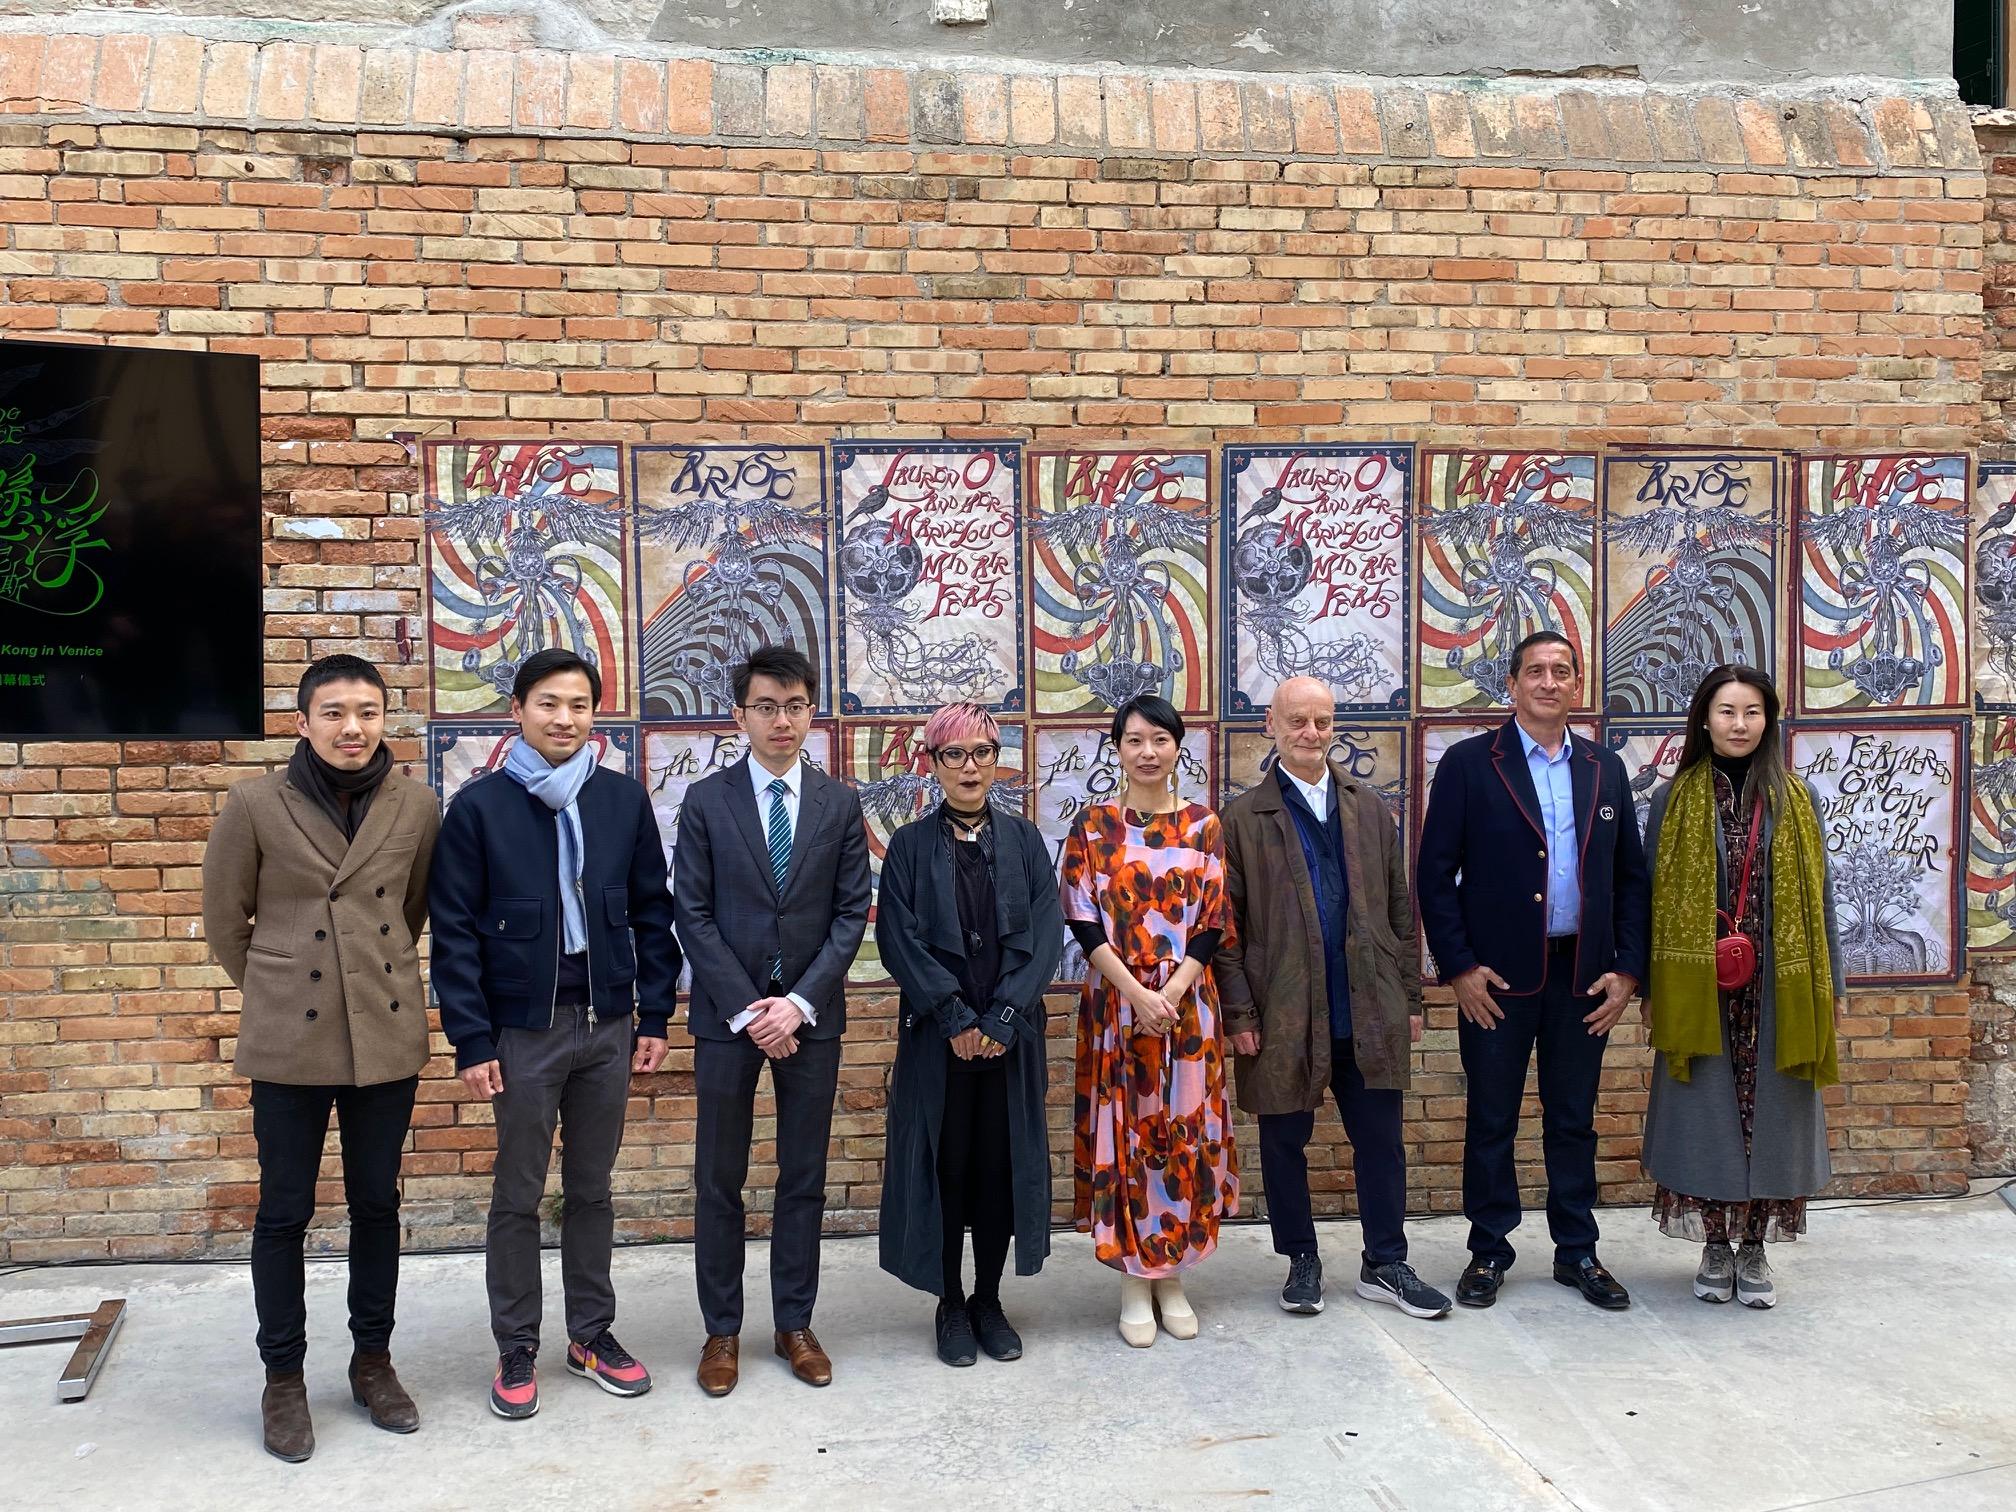 The Deputy Representative of the Hong Kong Economic and Trade Office in Brussels, Mr Henry Tsoi (third left), officiated at the opening reception of the Hong Kong Pavilion at the Venice Biennale in Venice on April 21 (Venice time), with the artist, Ms Angela Su (fourth left) and curator, Ms Freya Chou (fourth right), of the exhibition.